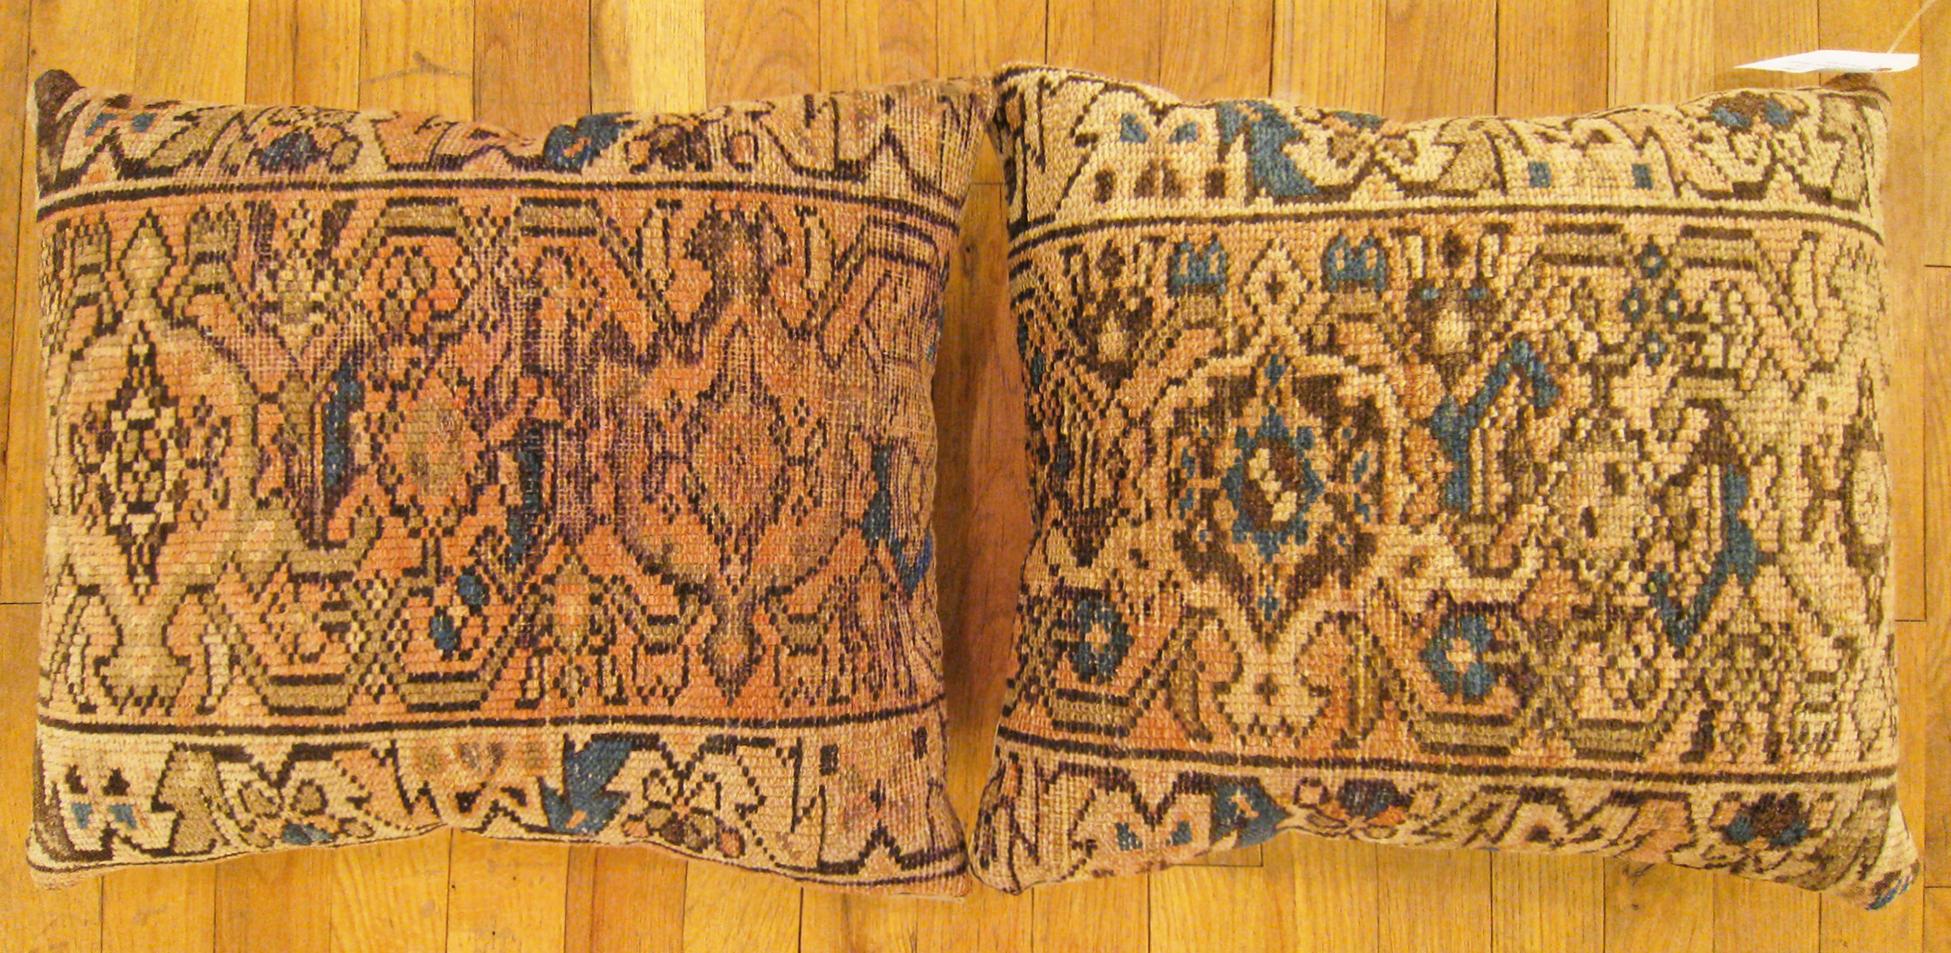 A pair of Antique Persian Hamadan Rug Pillows ; size 1'8” x 1'4” each.

An antique decorative pillows with geometric abstracts allover a light brown central field, size 1'8” x 1'4” each. This lovely decorative pillow features an antique fabric of